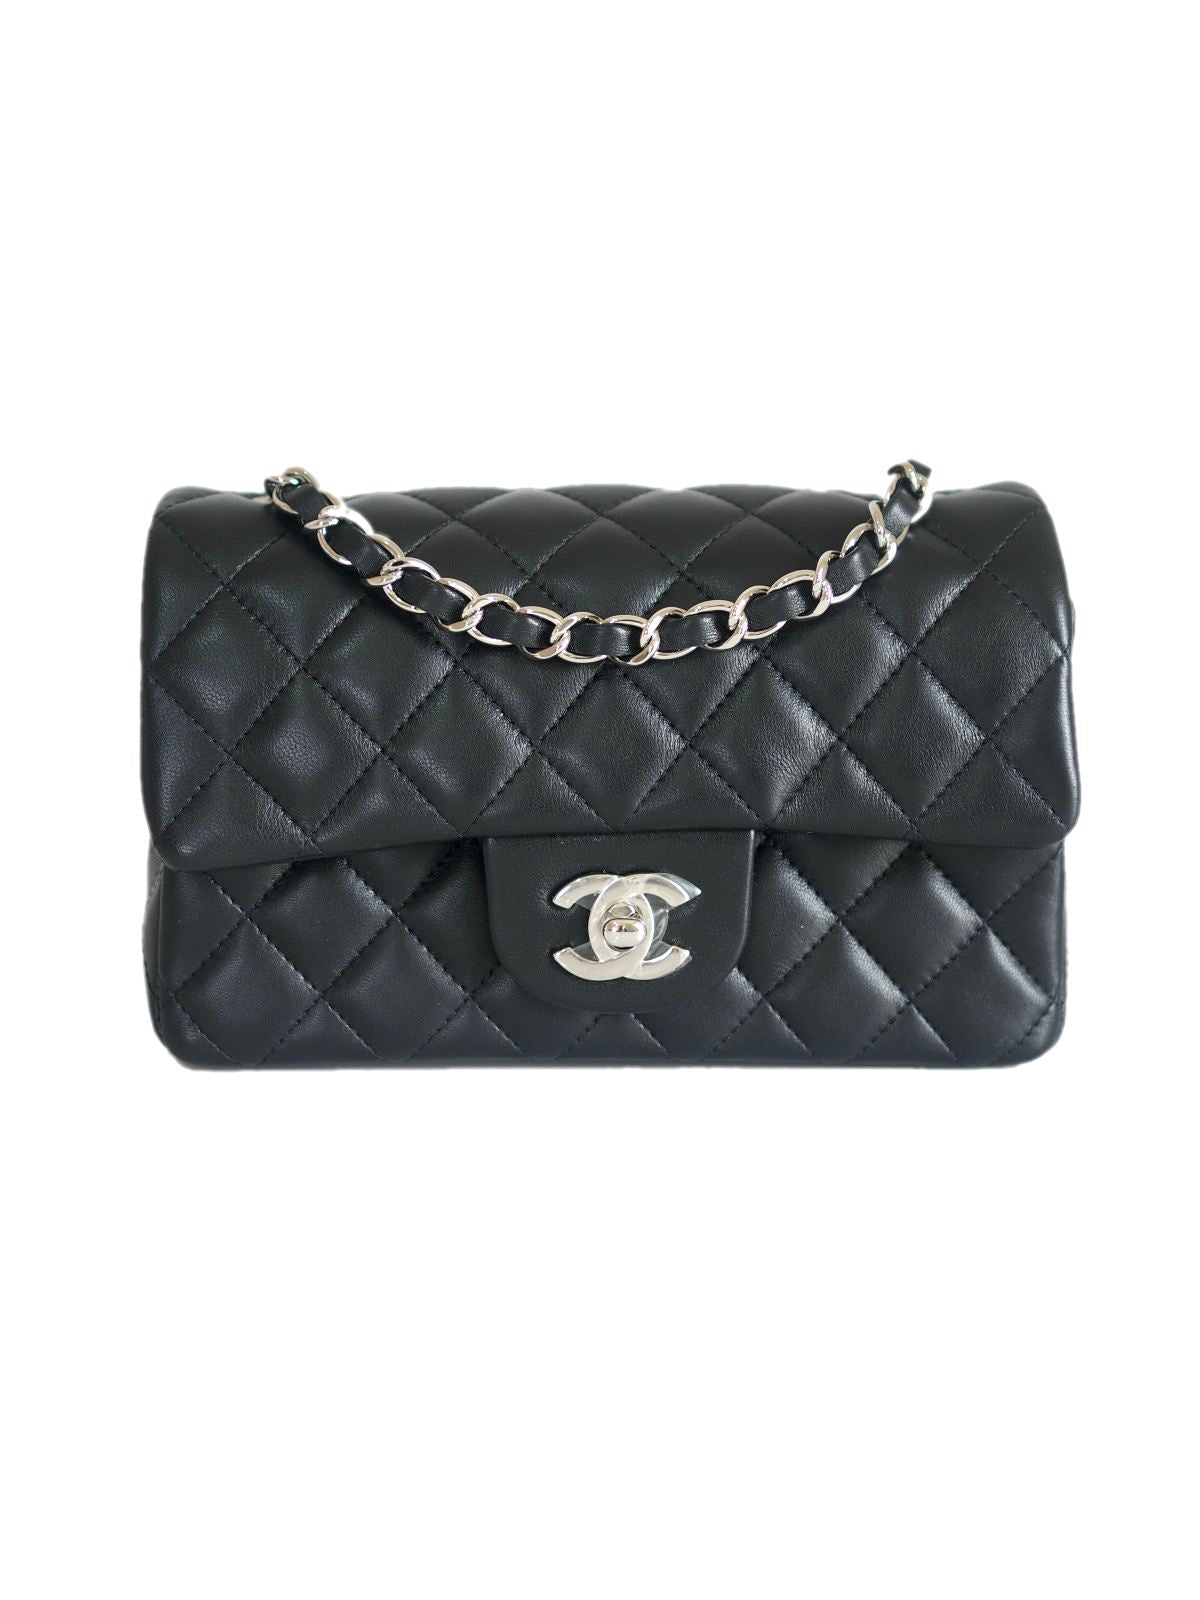 How Much Are Chanel Purses on the Resale Market? chanel mini rectangular flap